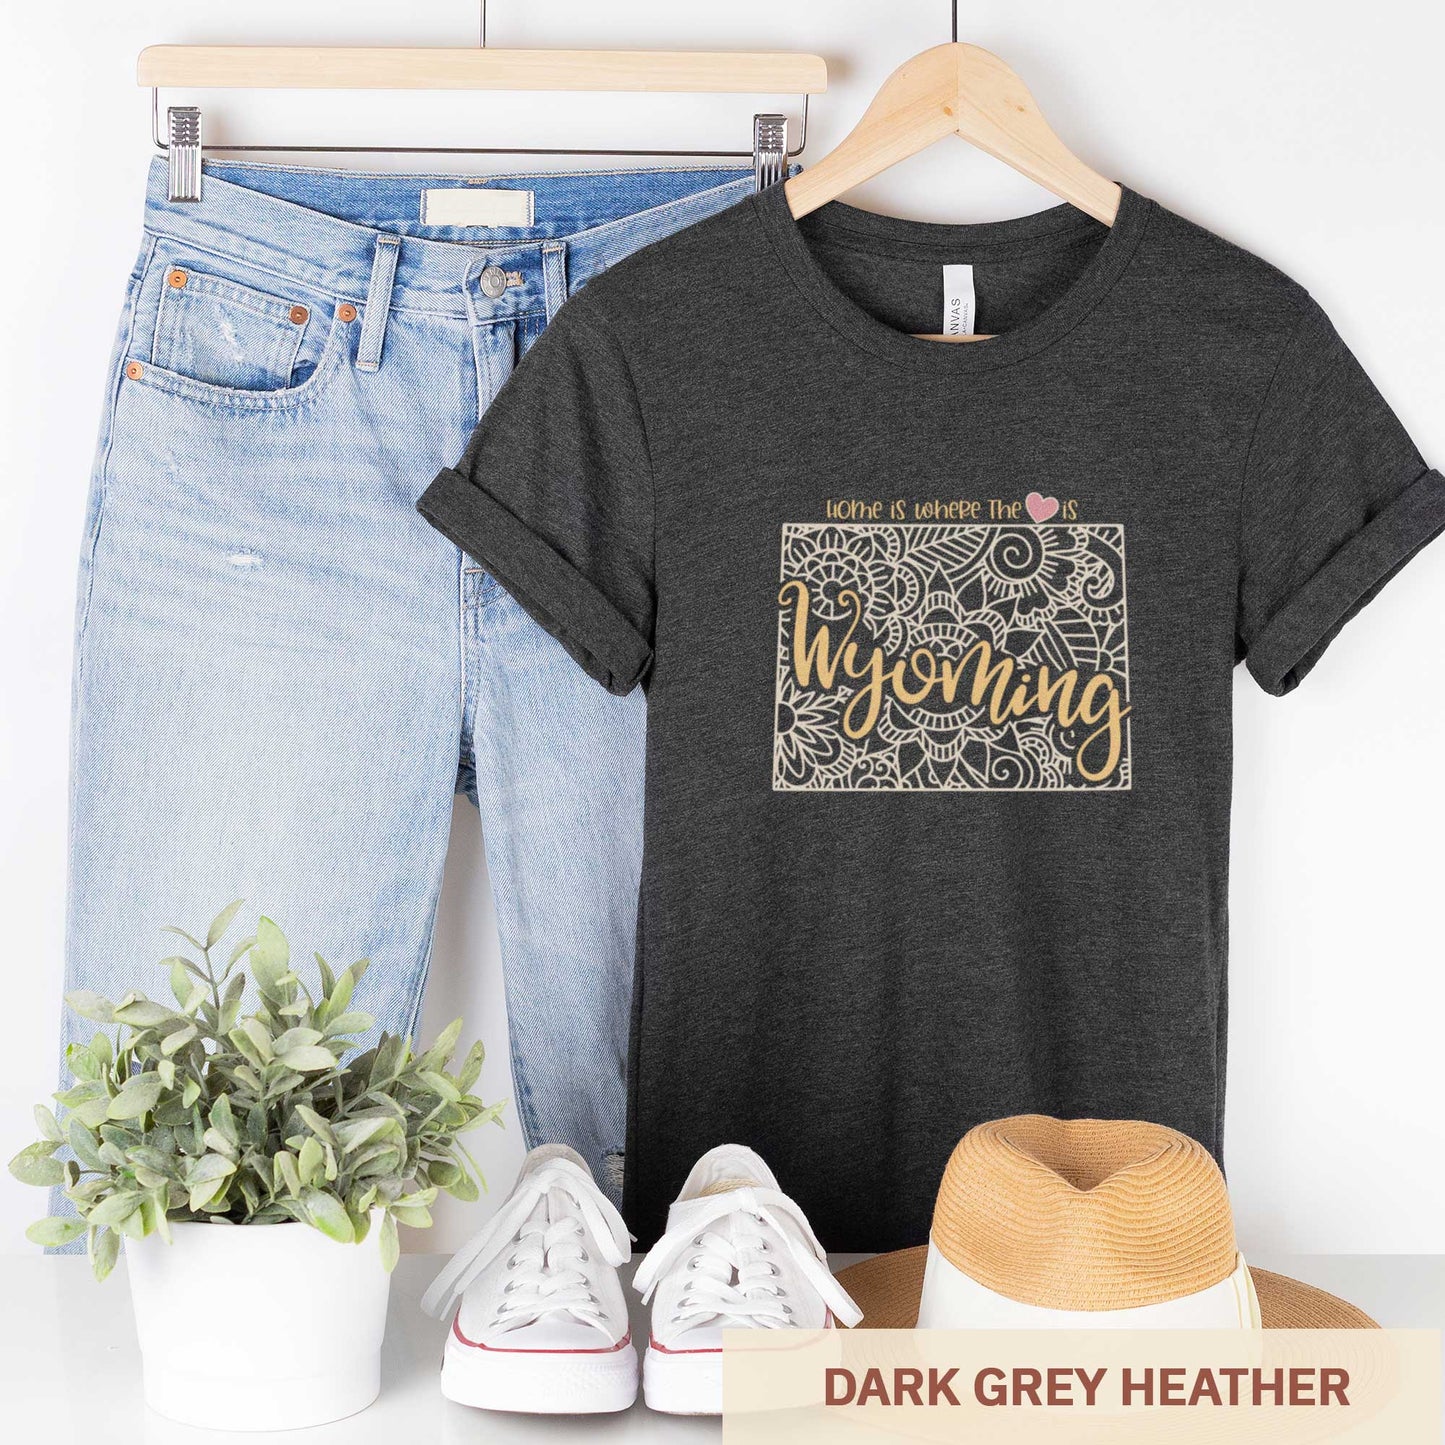 A hanging dark grey heather Bella Canvas t-shirt featuring a mandala in the shape of Wyoming with the words home is where the heart is.